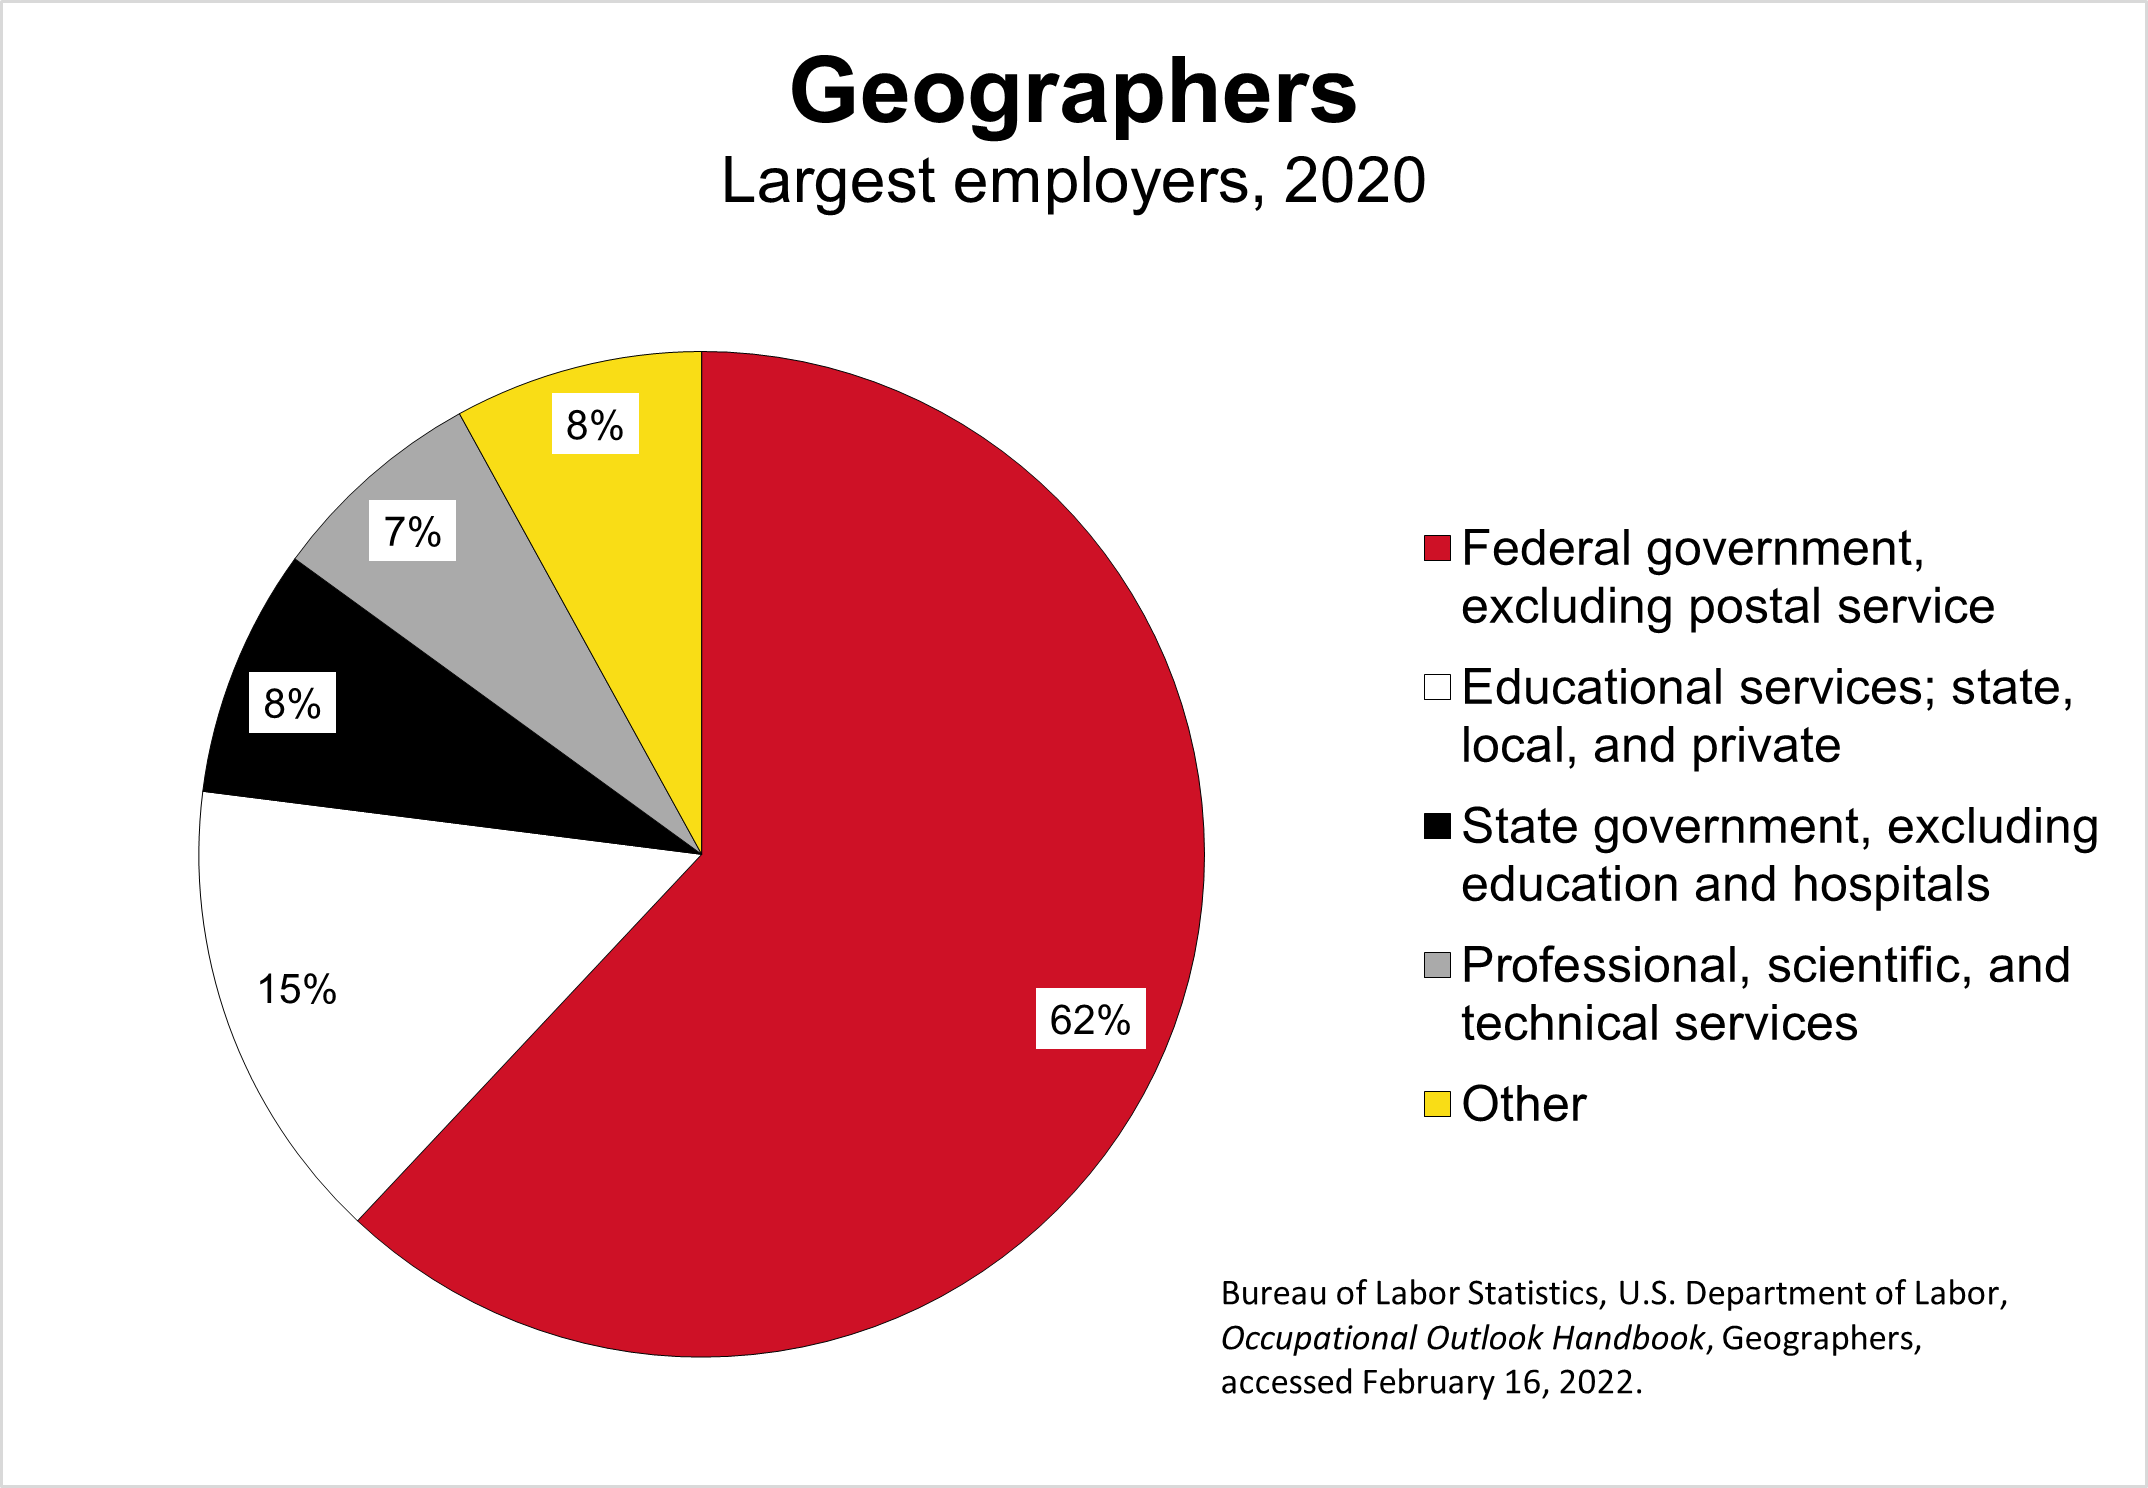 The largest employers of geographers in 2020 were: federal government excluding postal service (62%), educational services including state/local/private (15%), state government excluding education and hospitals (8%), professional/scientific/technical services (7%), and other (8%).  Source: Bureau of Labor Statistics, U.S. Department of Labor, Occupational Outlook Handbook, Geographers, accessed February 16, 2022